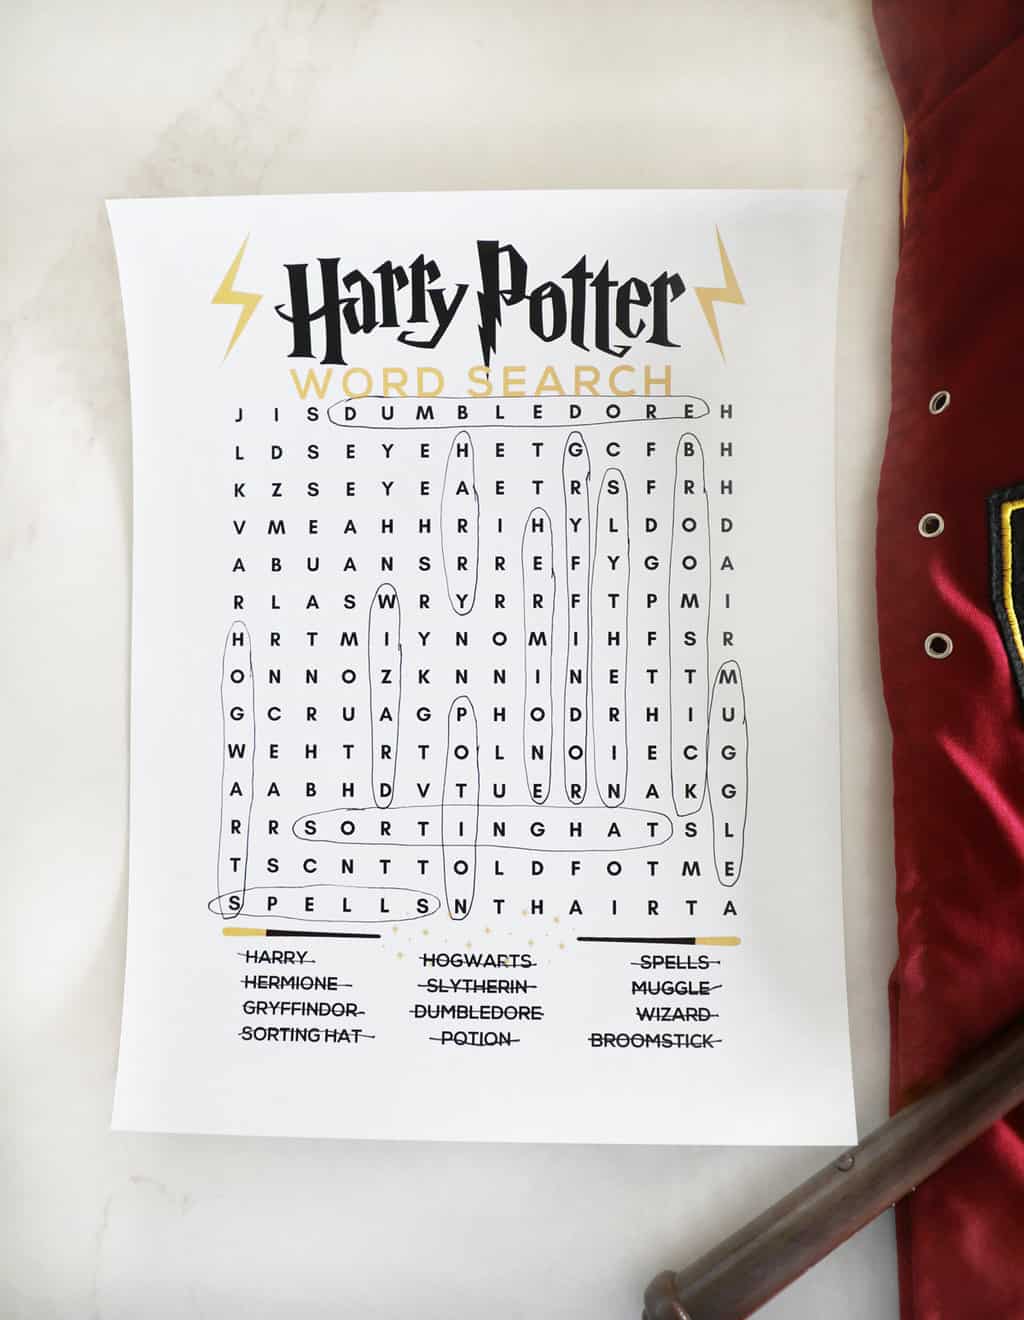 A Harry Potter word search with all the answers circled.